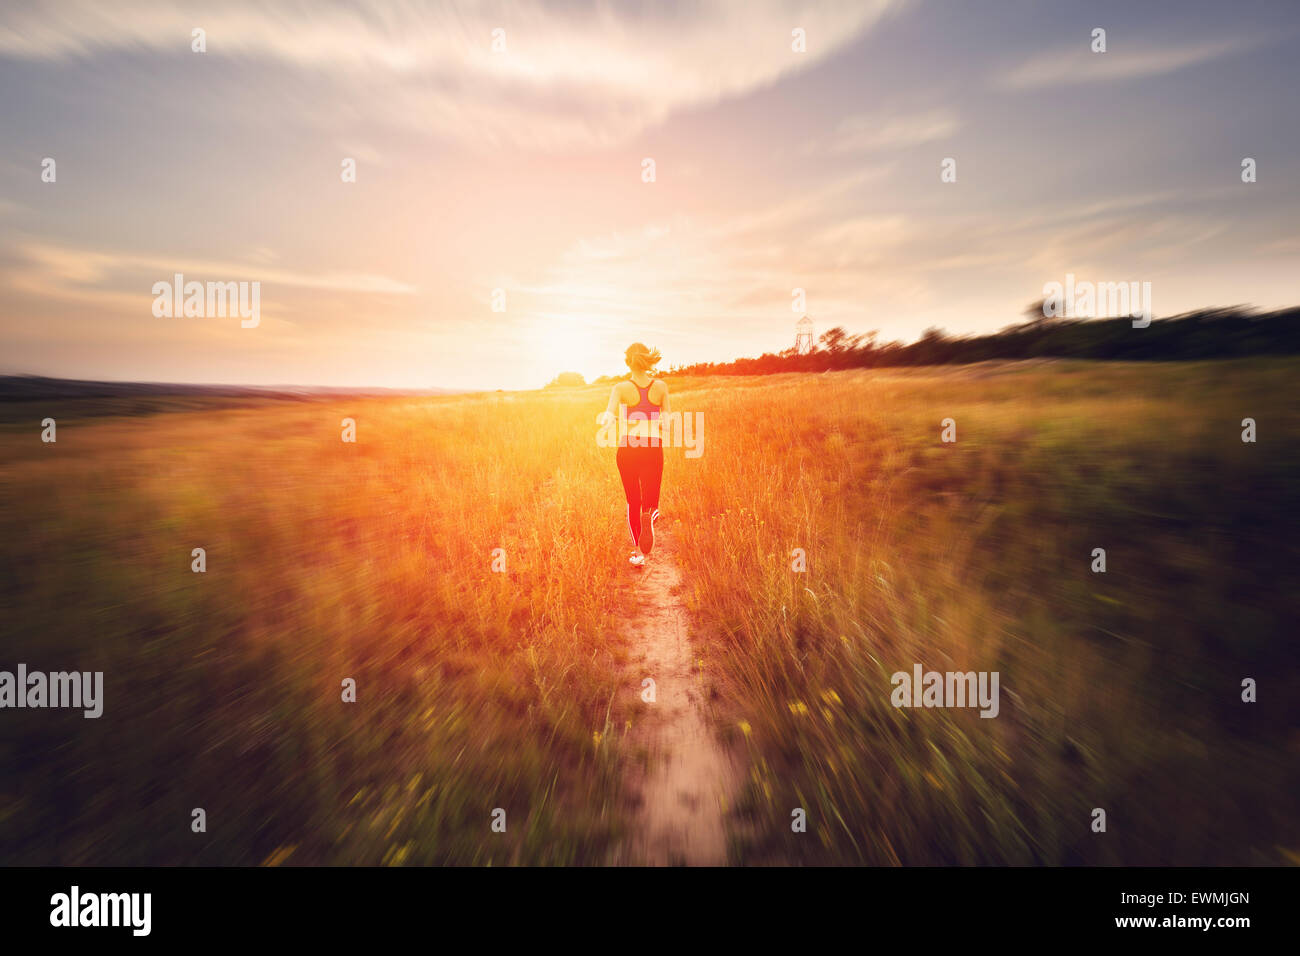 Young woman running on a rural road at sunset in summer field. Lifestyle sports background Stock Photo